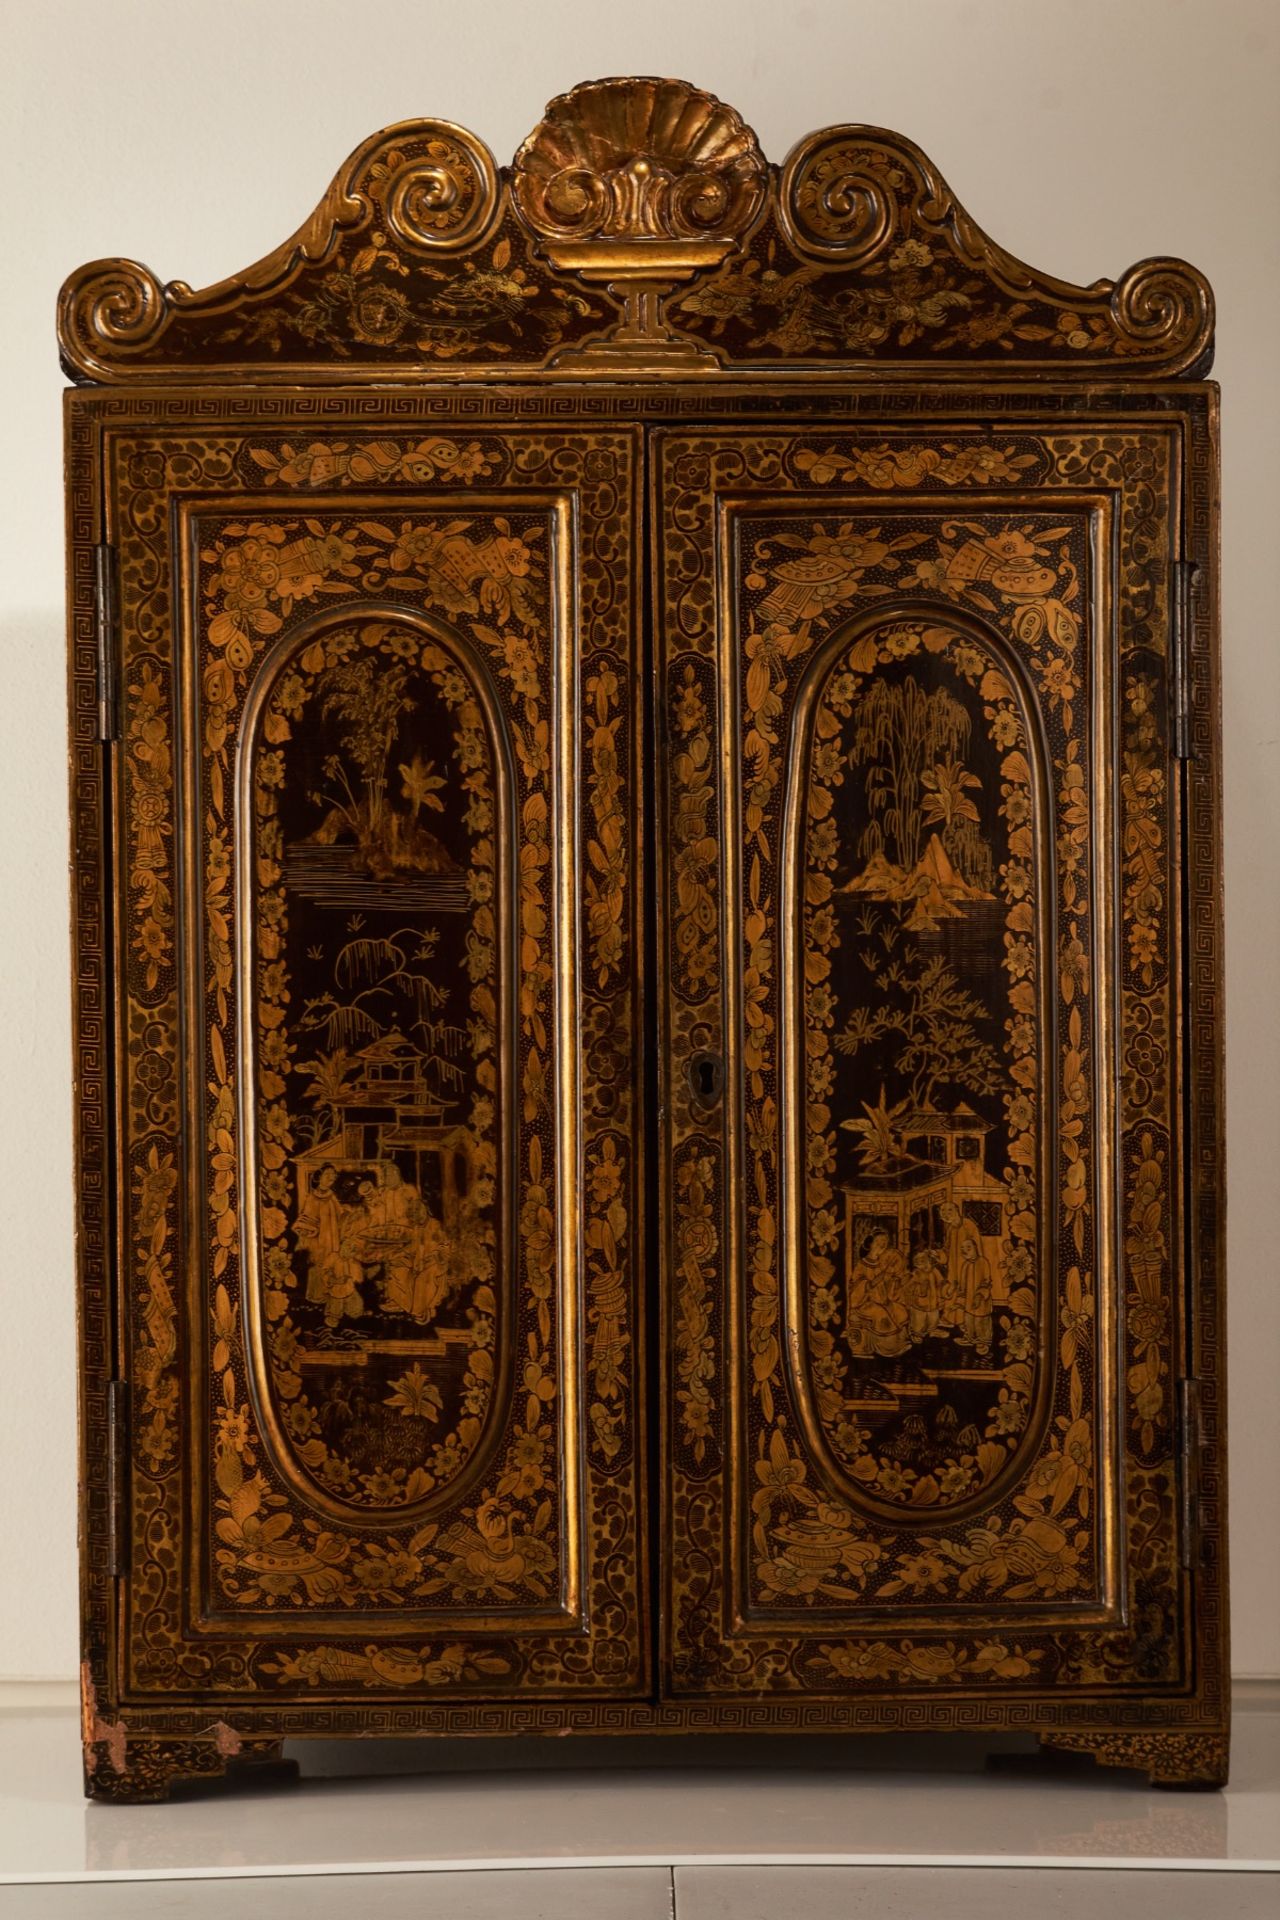 A mid-19th century Chinese export lacquer table cabinet, circa 1860